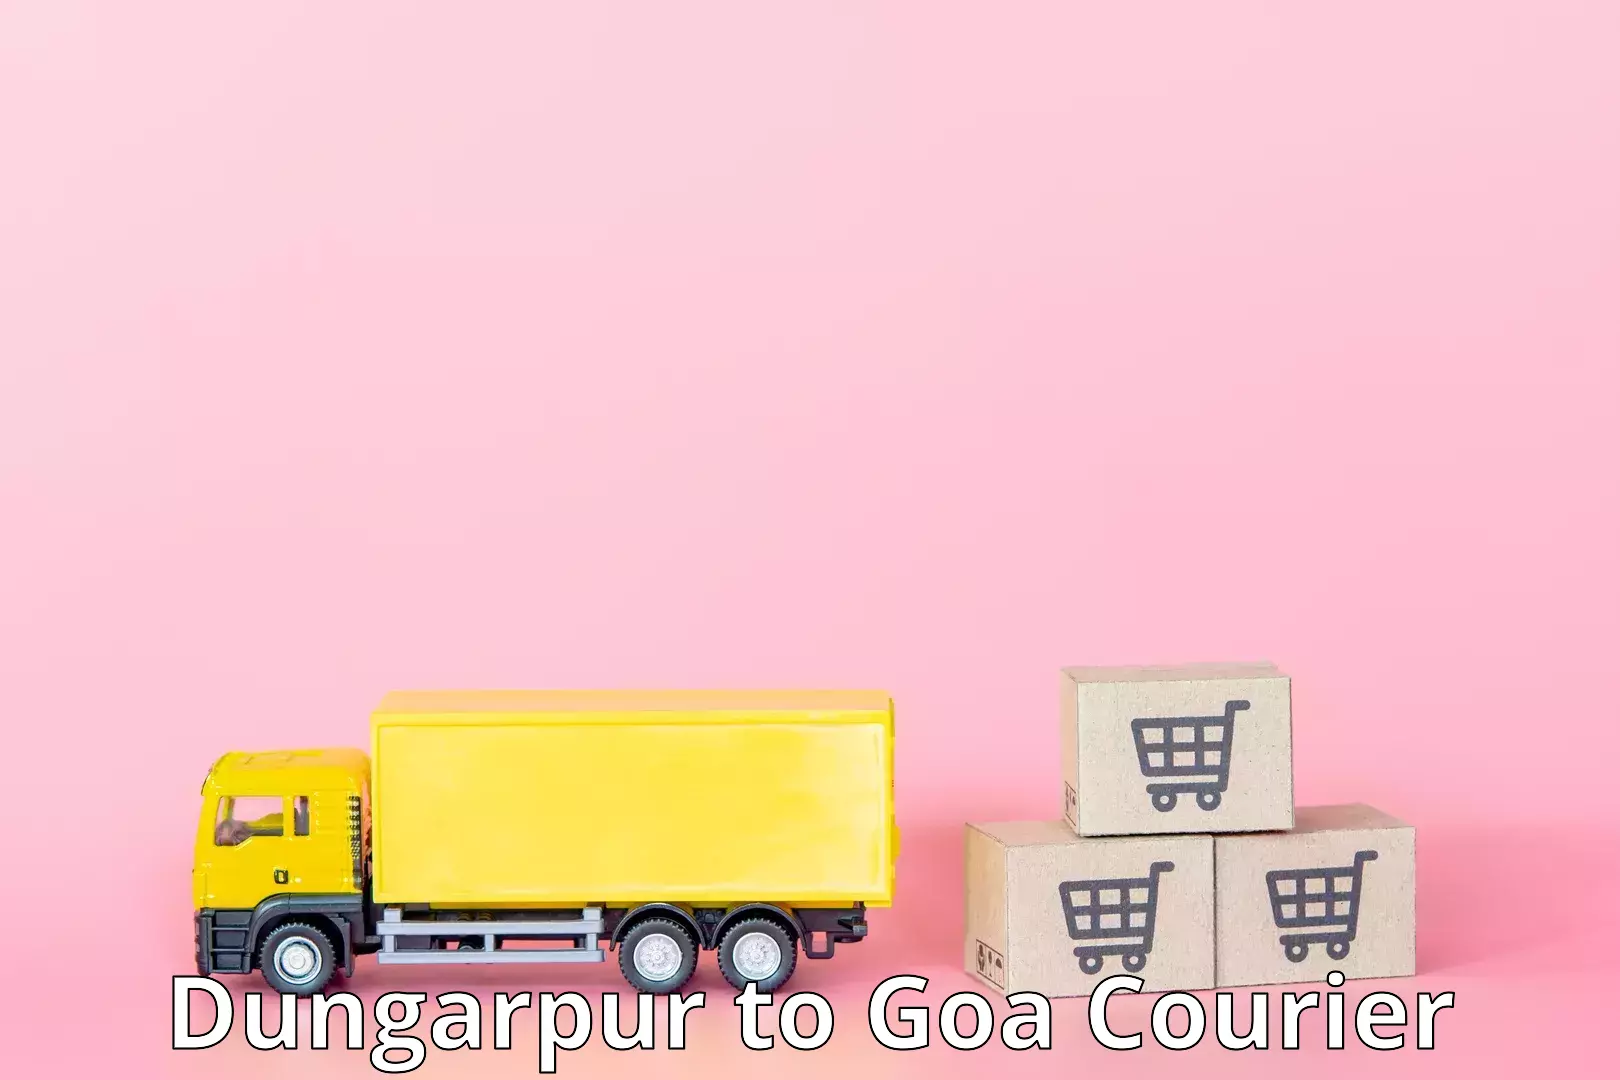 Quality courier partnerships Dungarpur to Goa